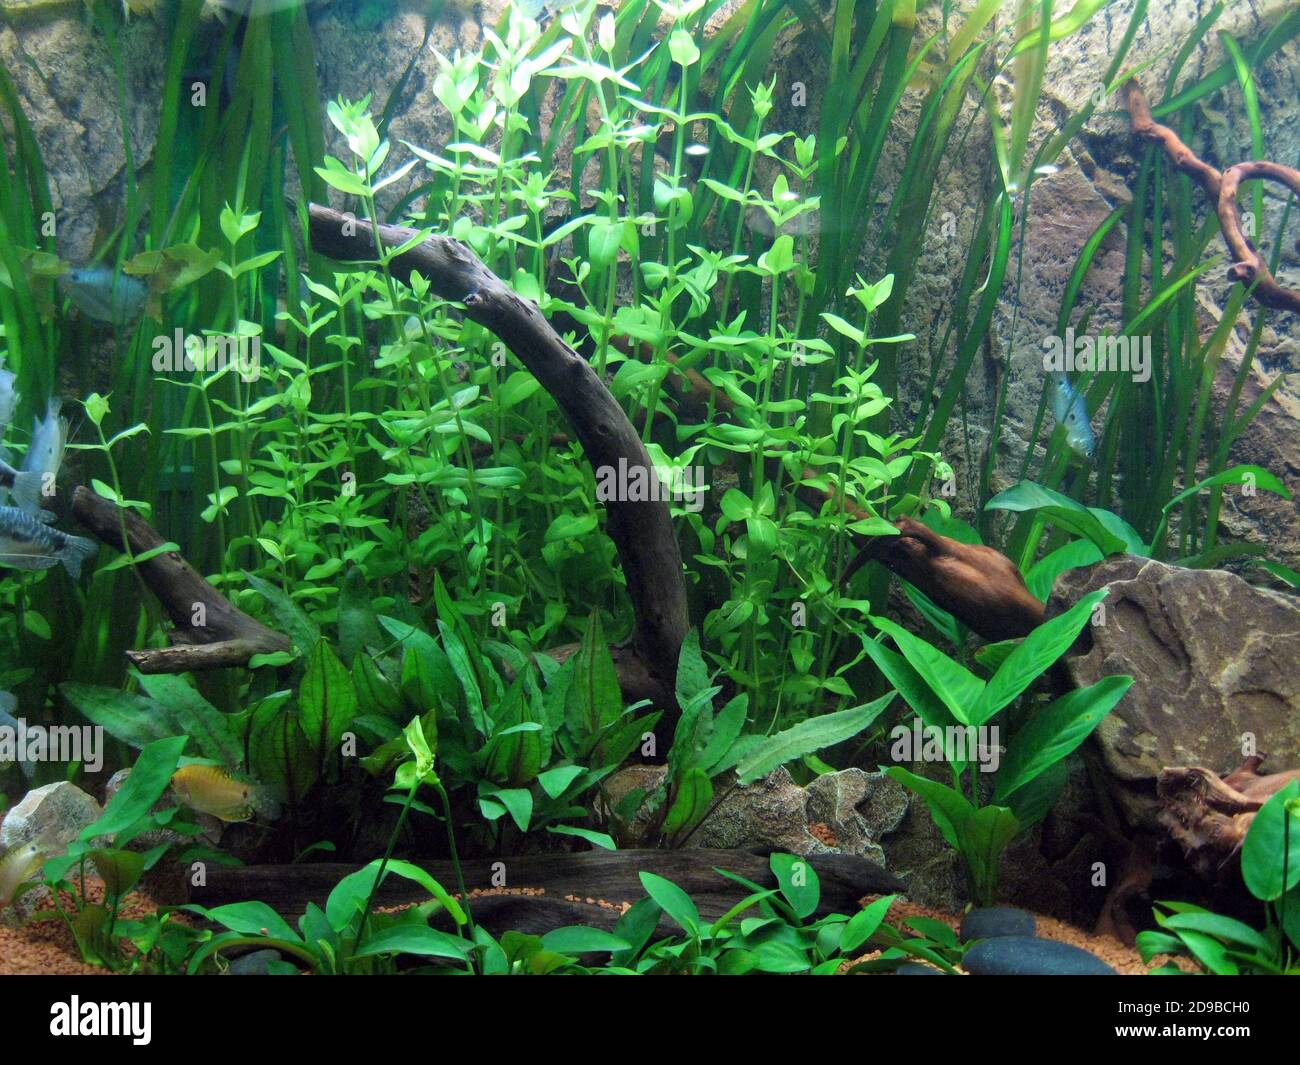 Biotope aquarium with a beautiful group of Hygrophila polysperma, also known as dwarf hygro, Indian waterweed and dwarf hygrophila Stock Photo